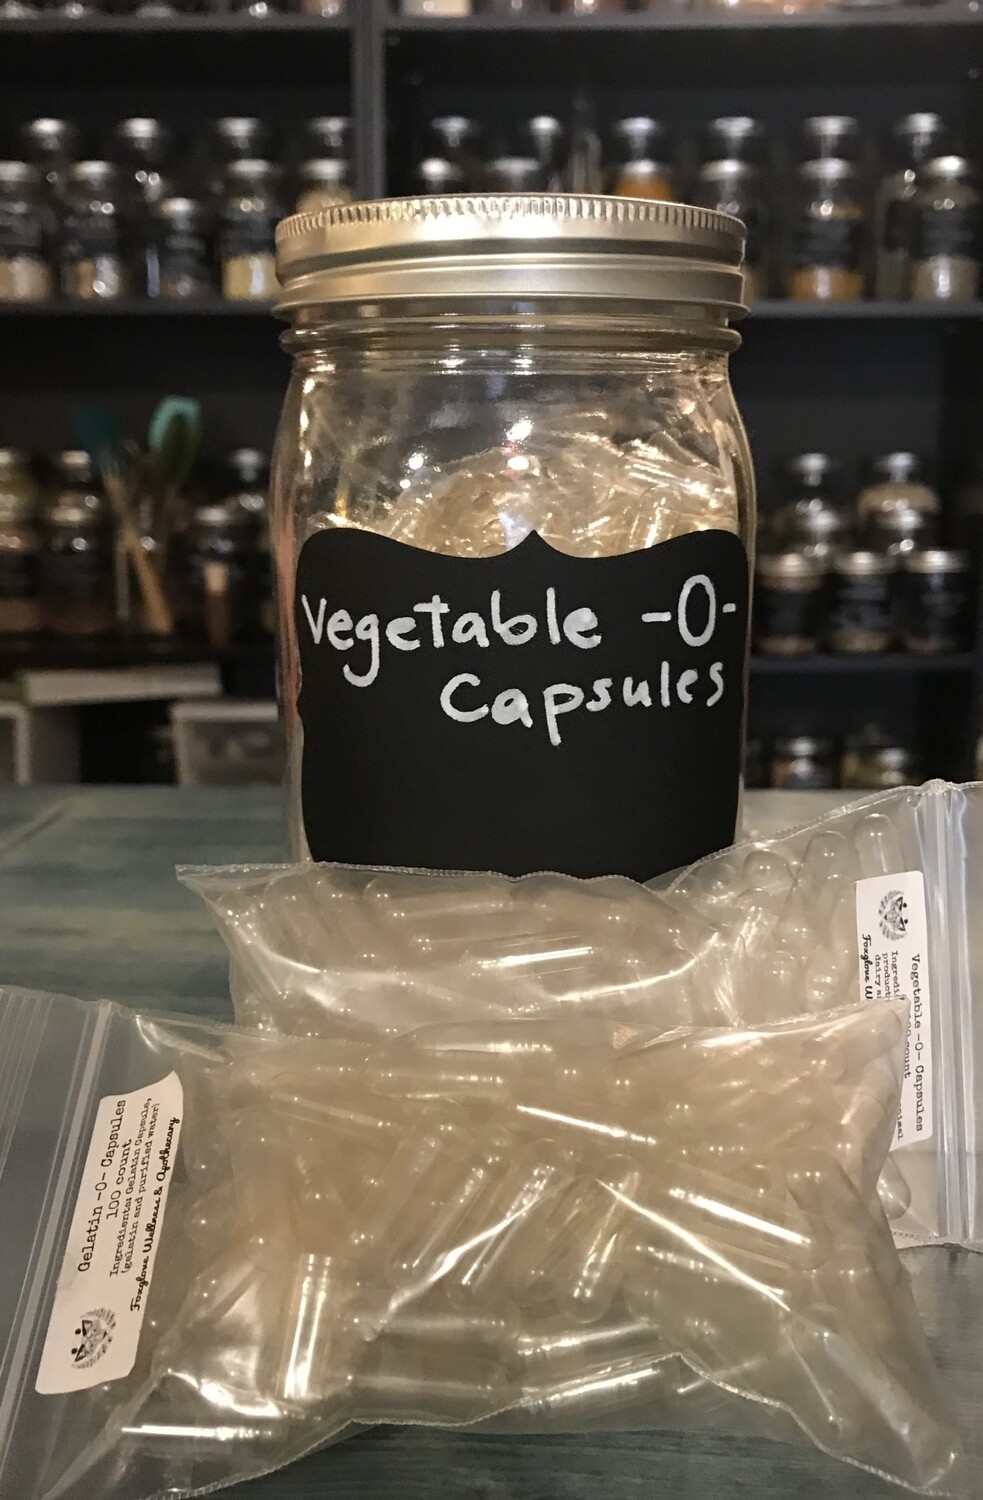 Capsules Size -0- or -00-, 100 count vegetable